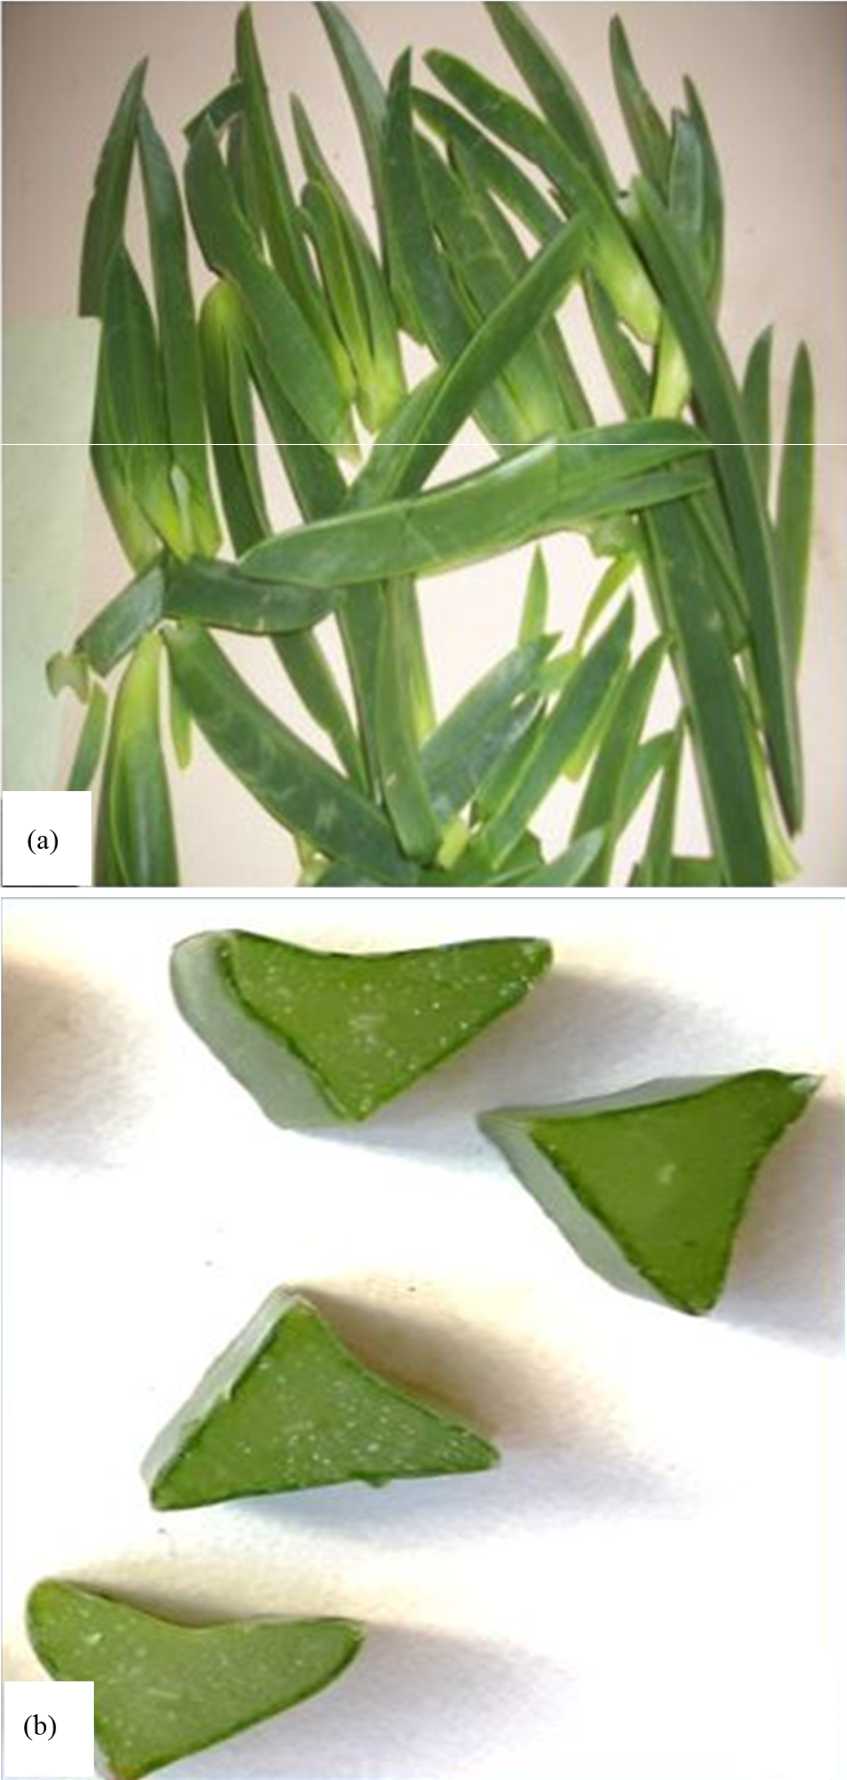 Image for - Micro-morphological Information of Carpobrotus edulis (L.) Bolus: A Southern African Herbal Plant